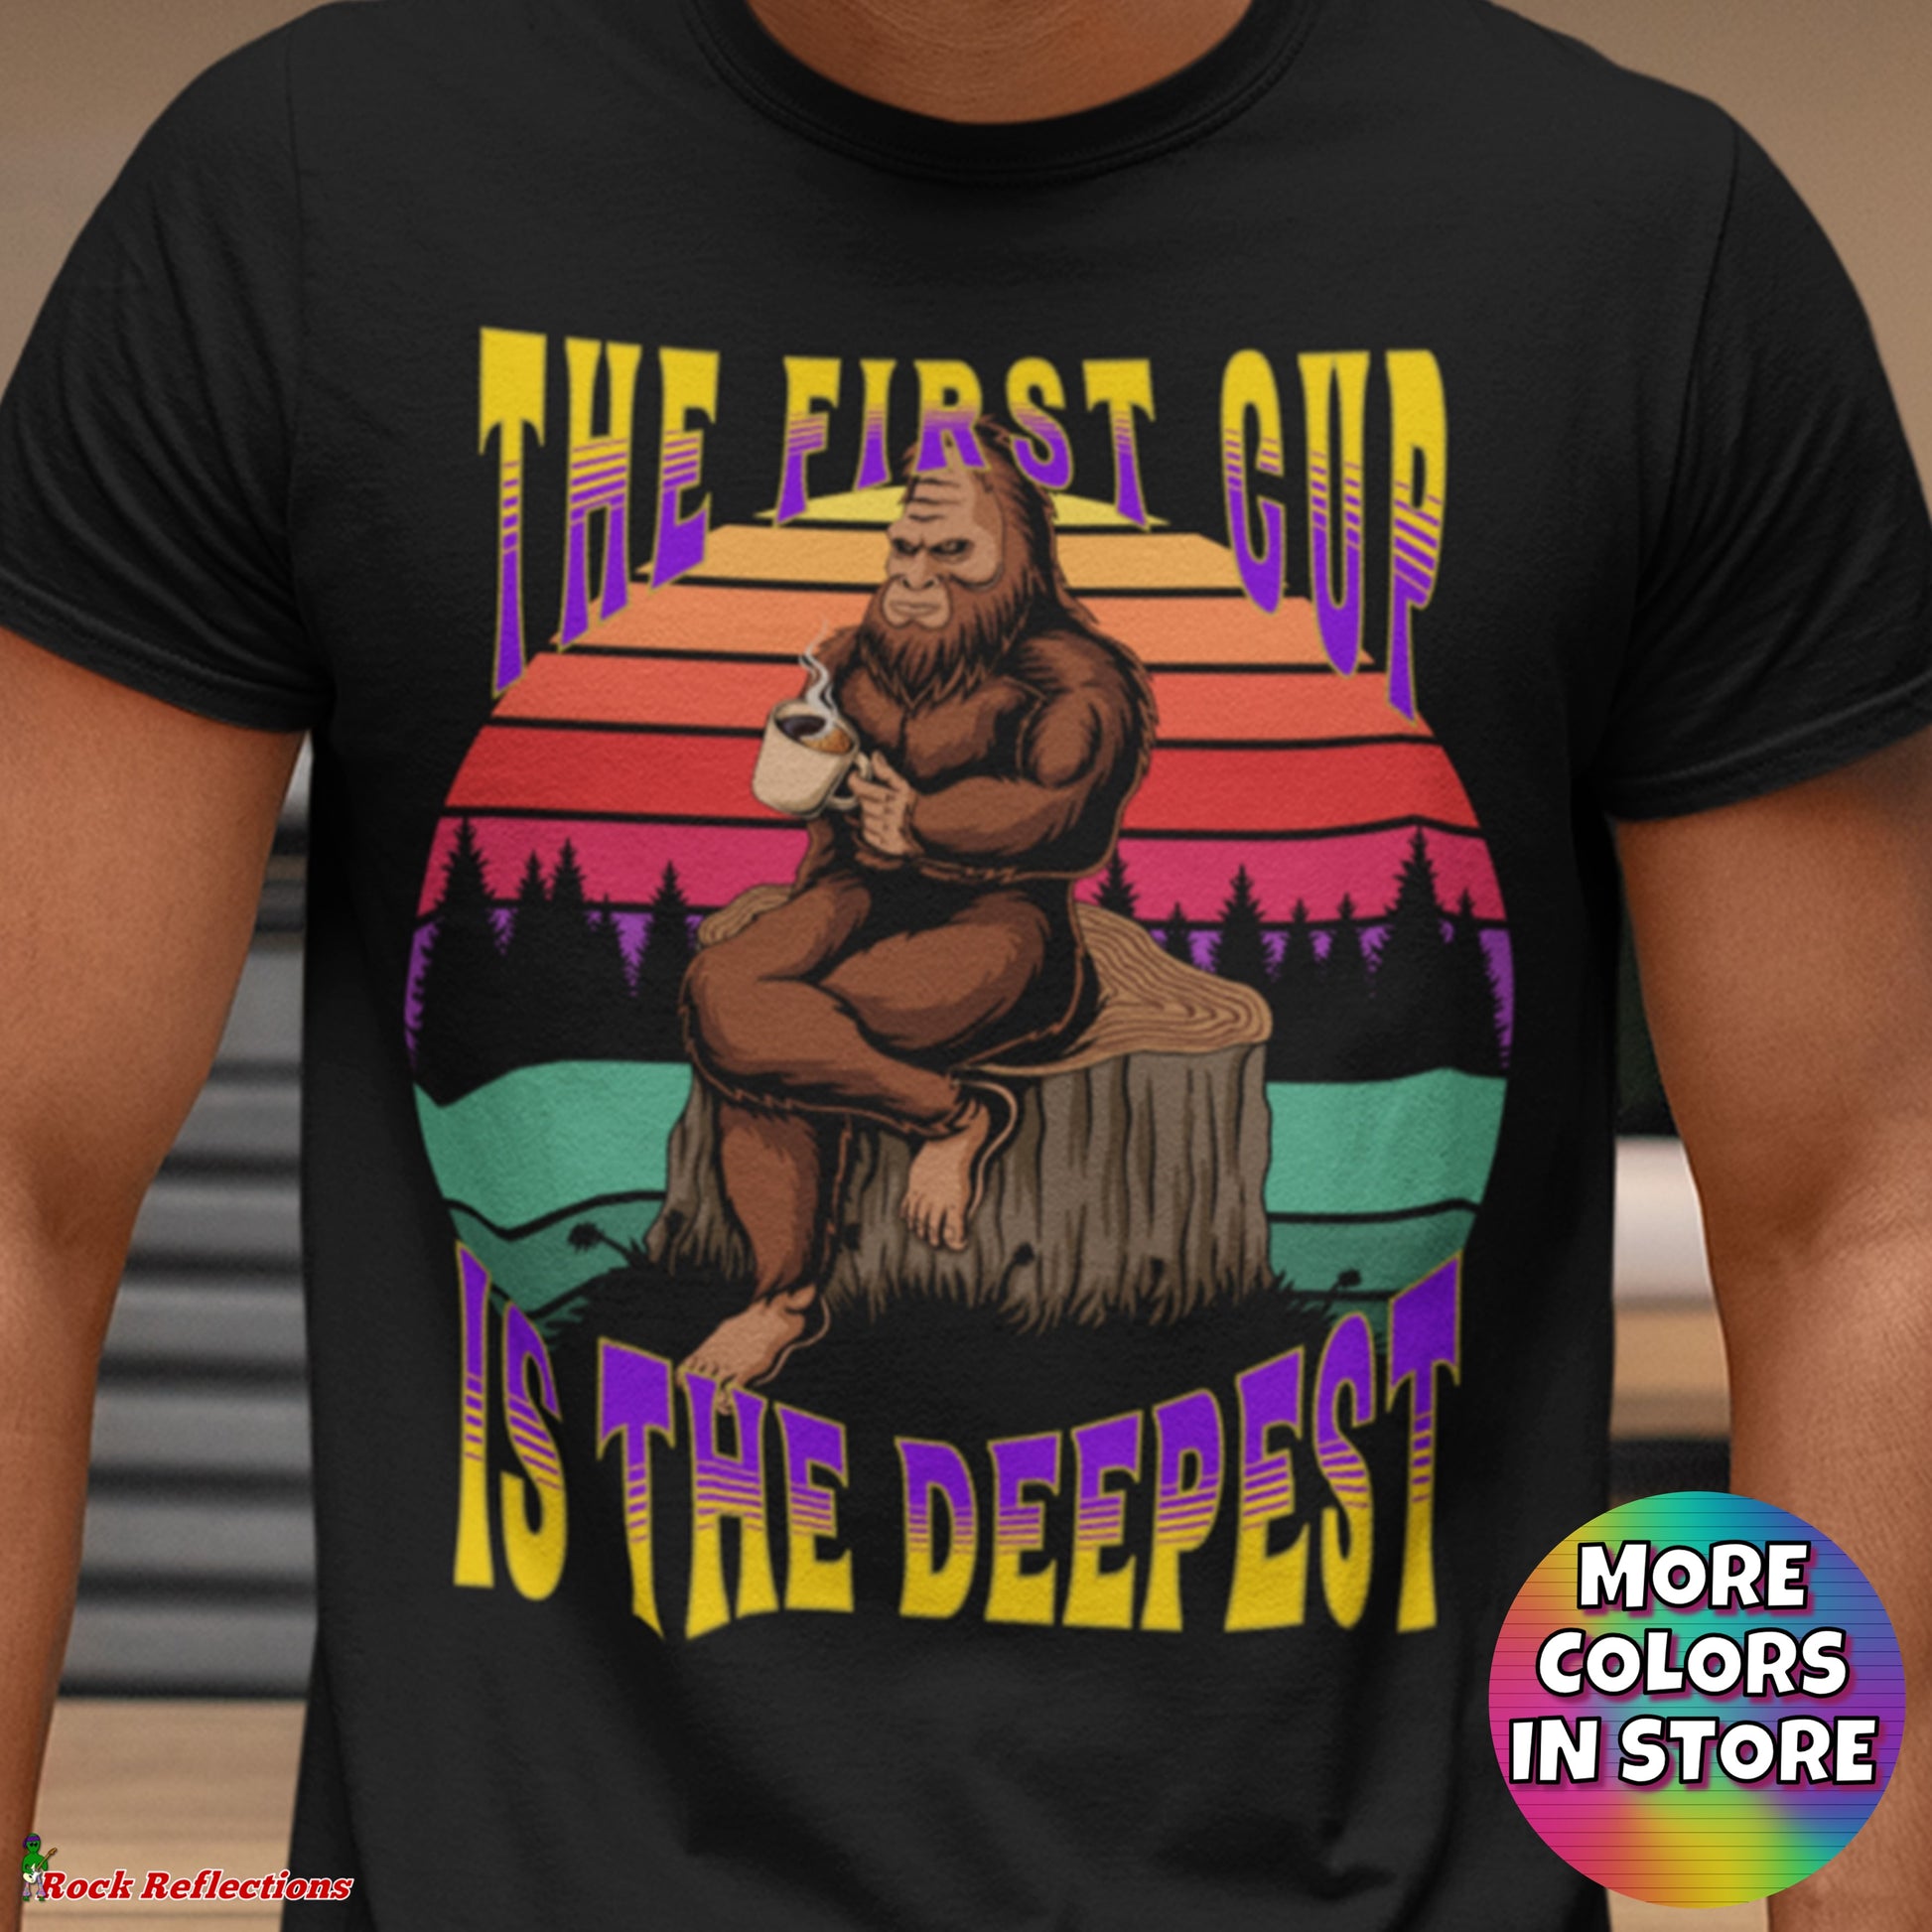 First Cup Is The Deepest T-Shirt SPOD